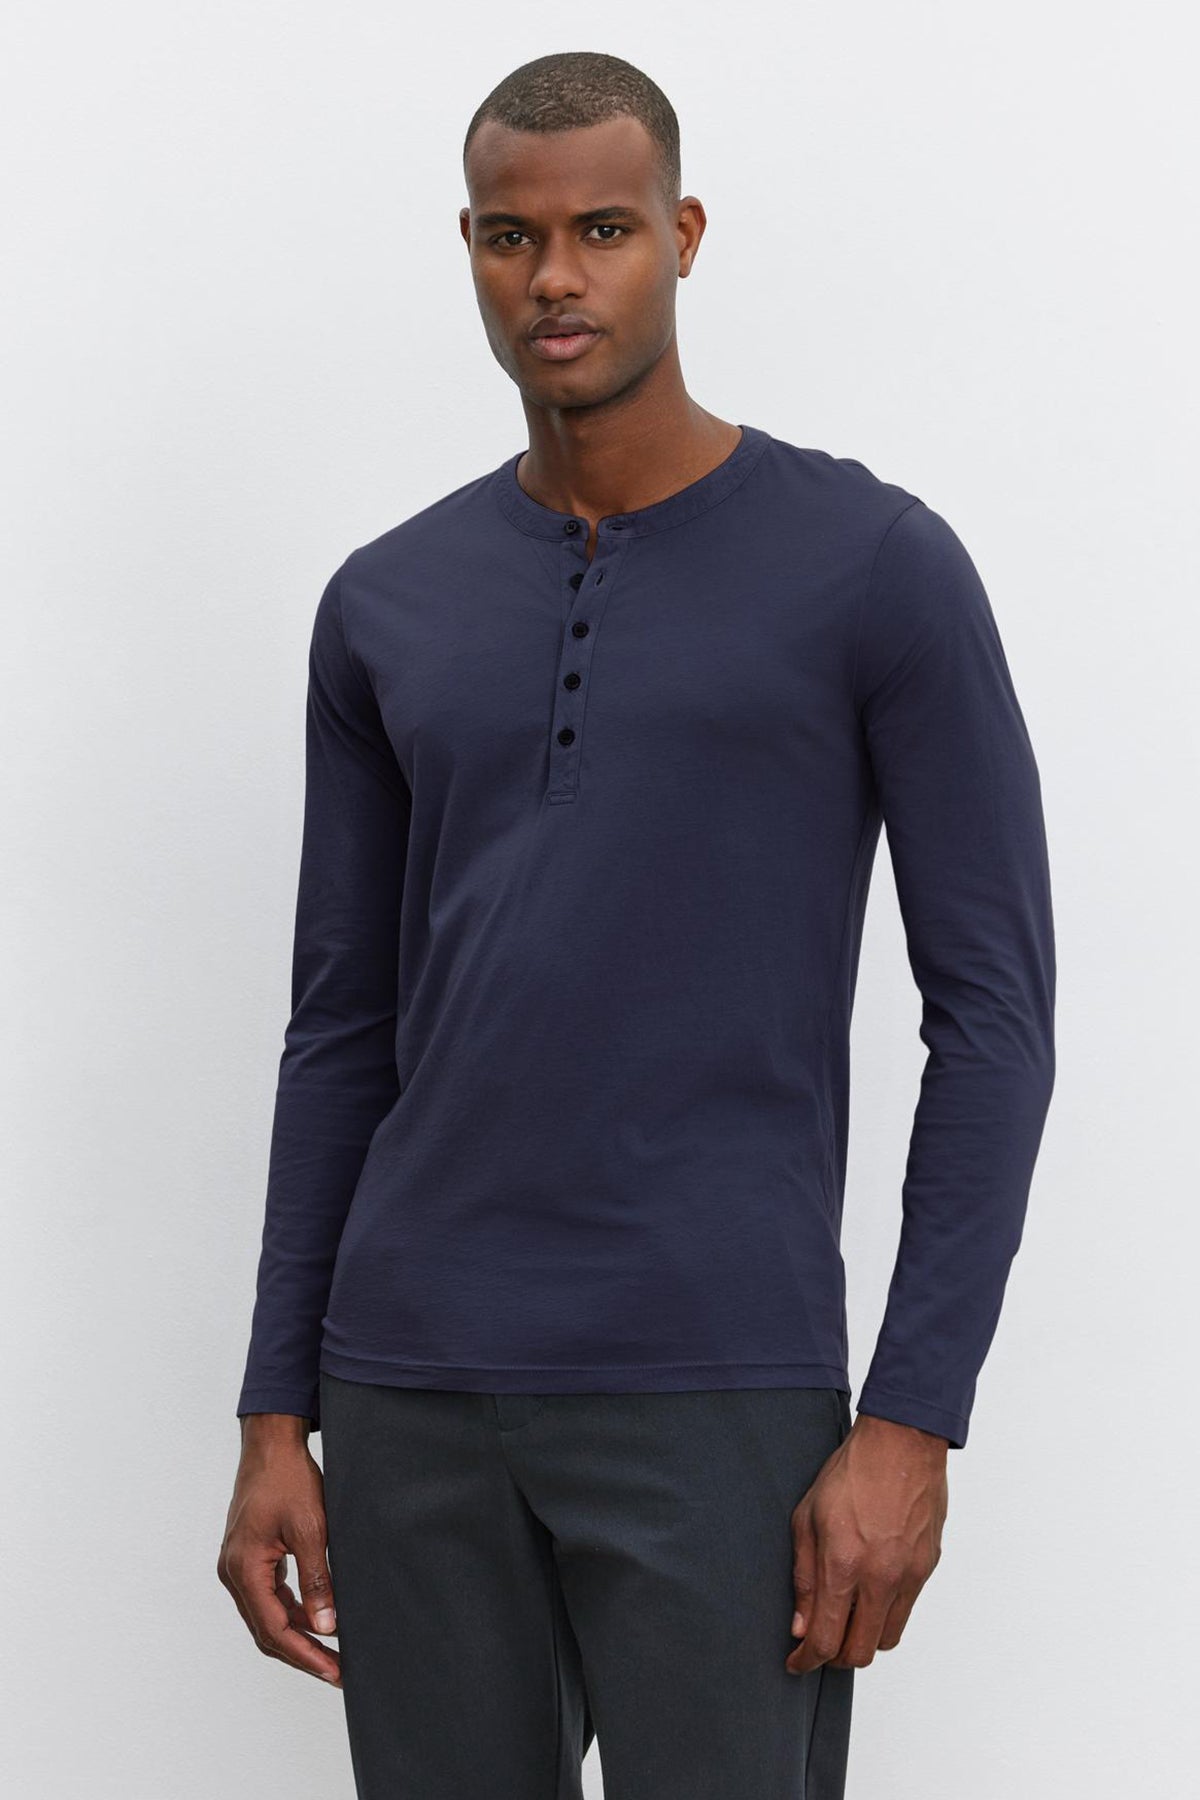   The model is wearing a lightweight navy long sleeve ALVARO COTTON JERSEY HENLEY t-shirt by Velvet by Graham & Spencer. 